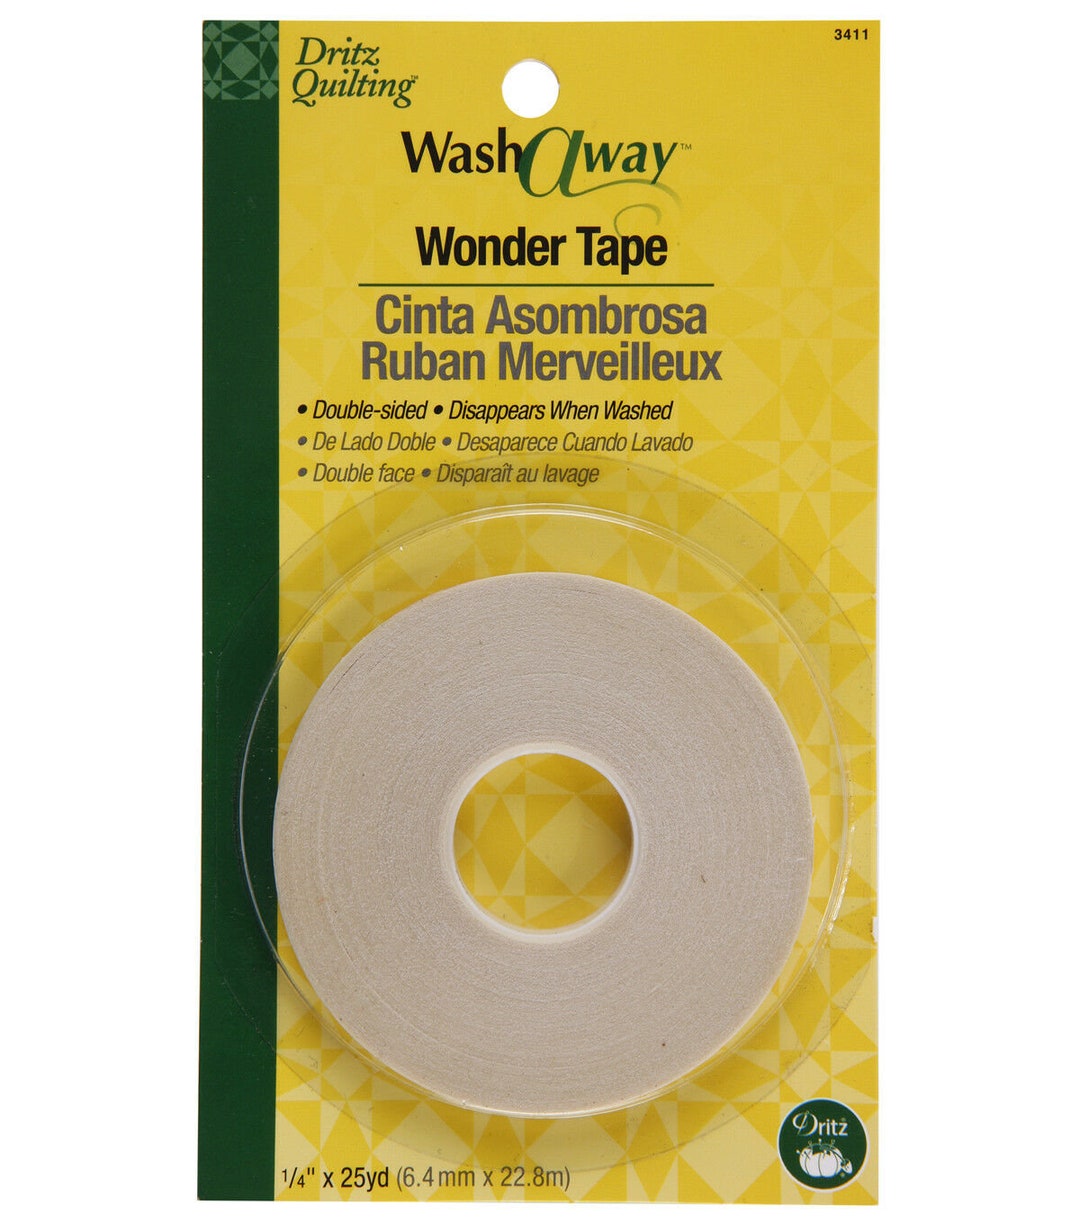 Dritz Quilting Washaway Wonder Tape Double Sided 1/4x25yd 3411 - Etsy